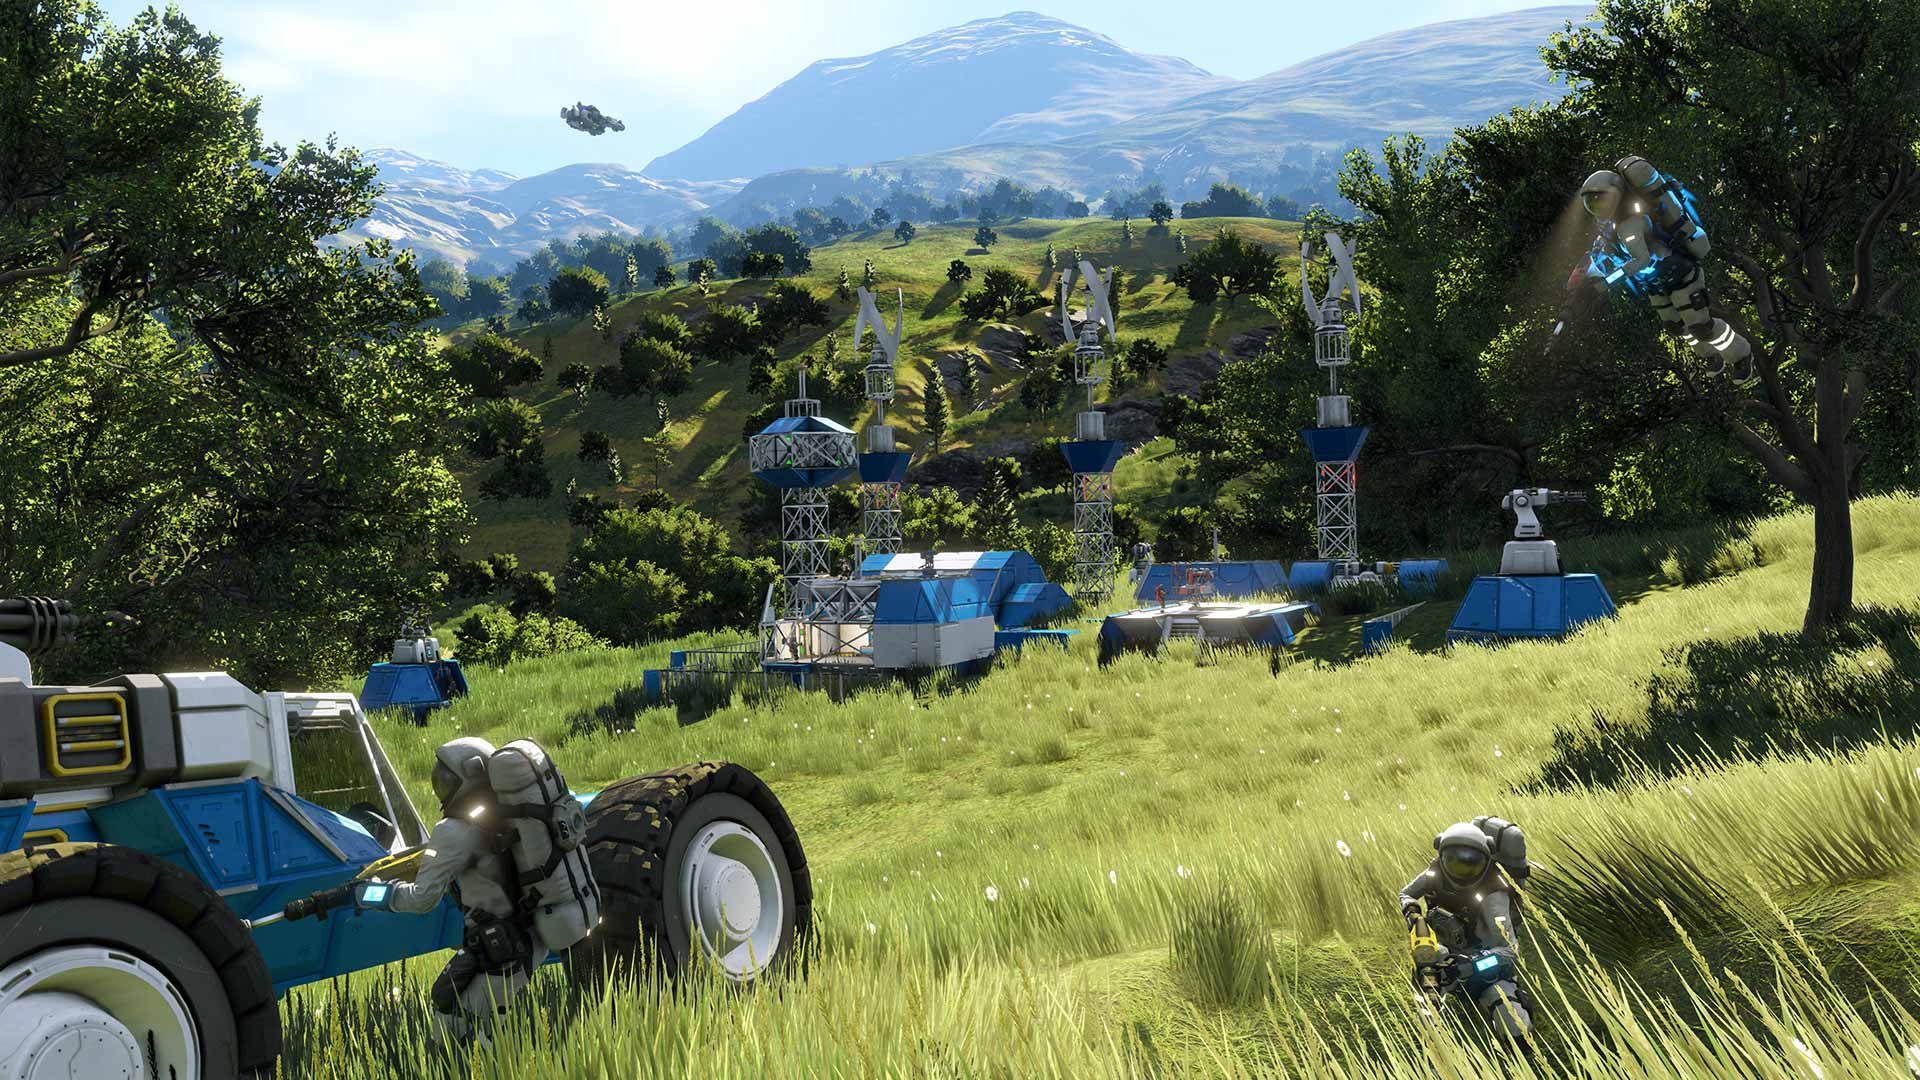 HD desktop wallpaper of Space Engineers game featuring a scenic landscape with engineers, a rover, and structures.